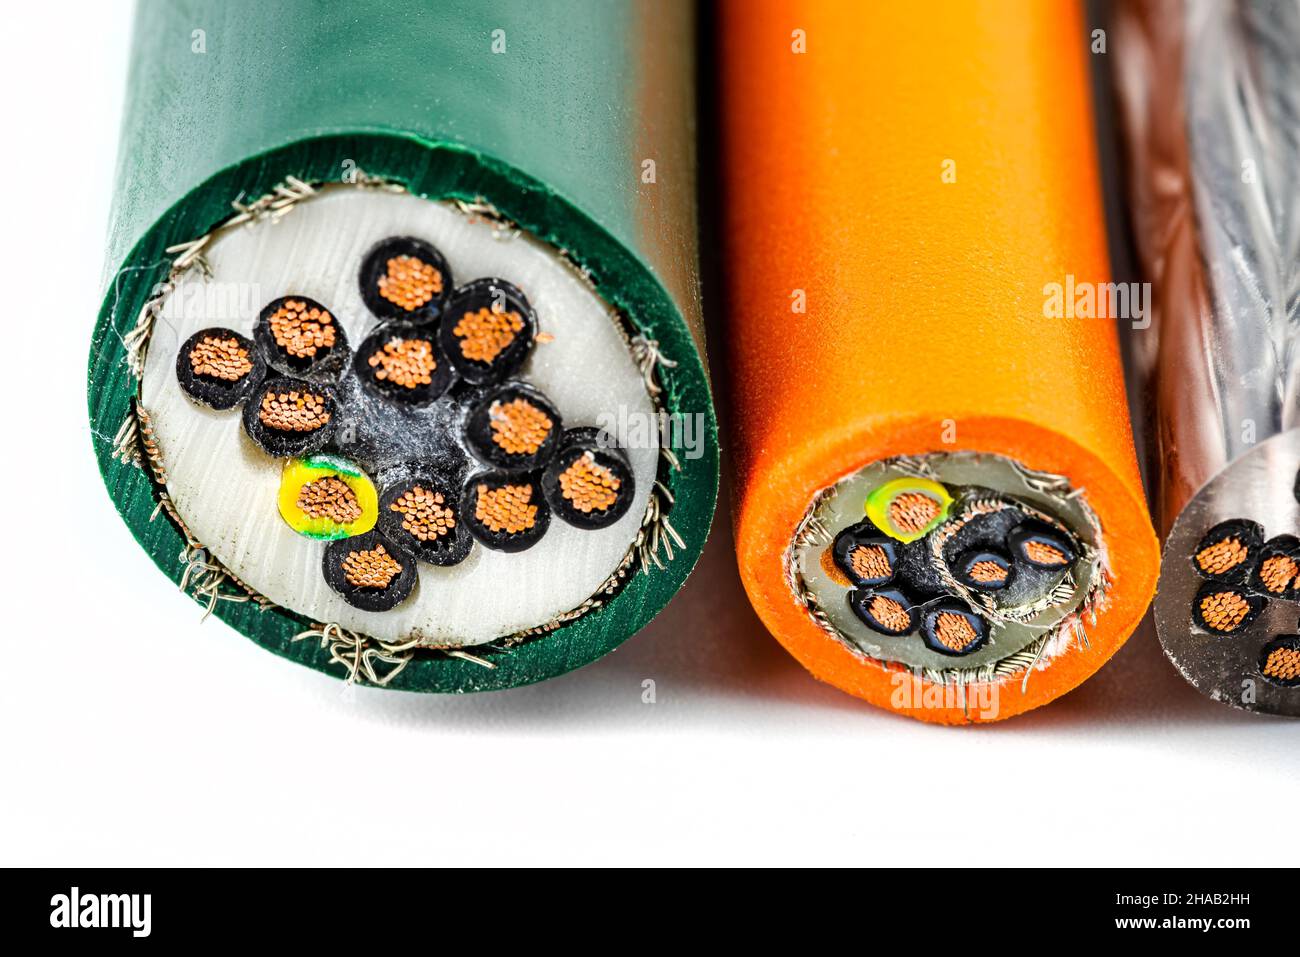 Macro photo of the cross section of various electric cables, isolated on a white background. Stock Photo